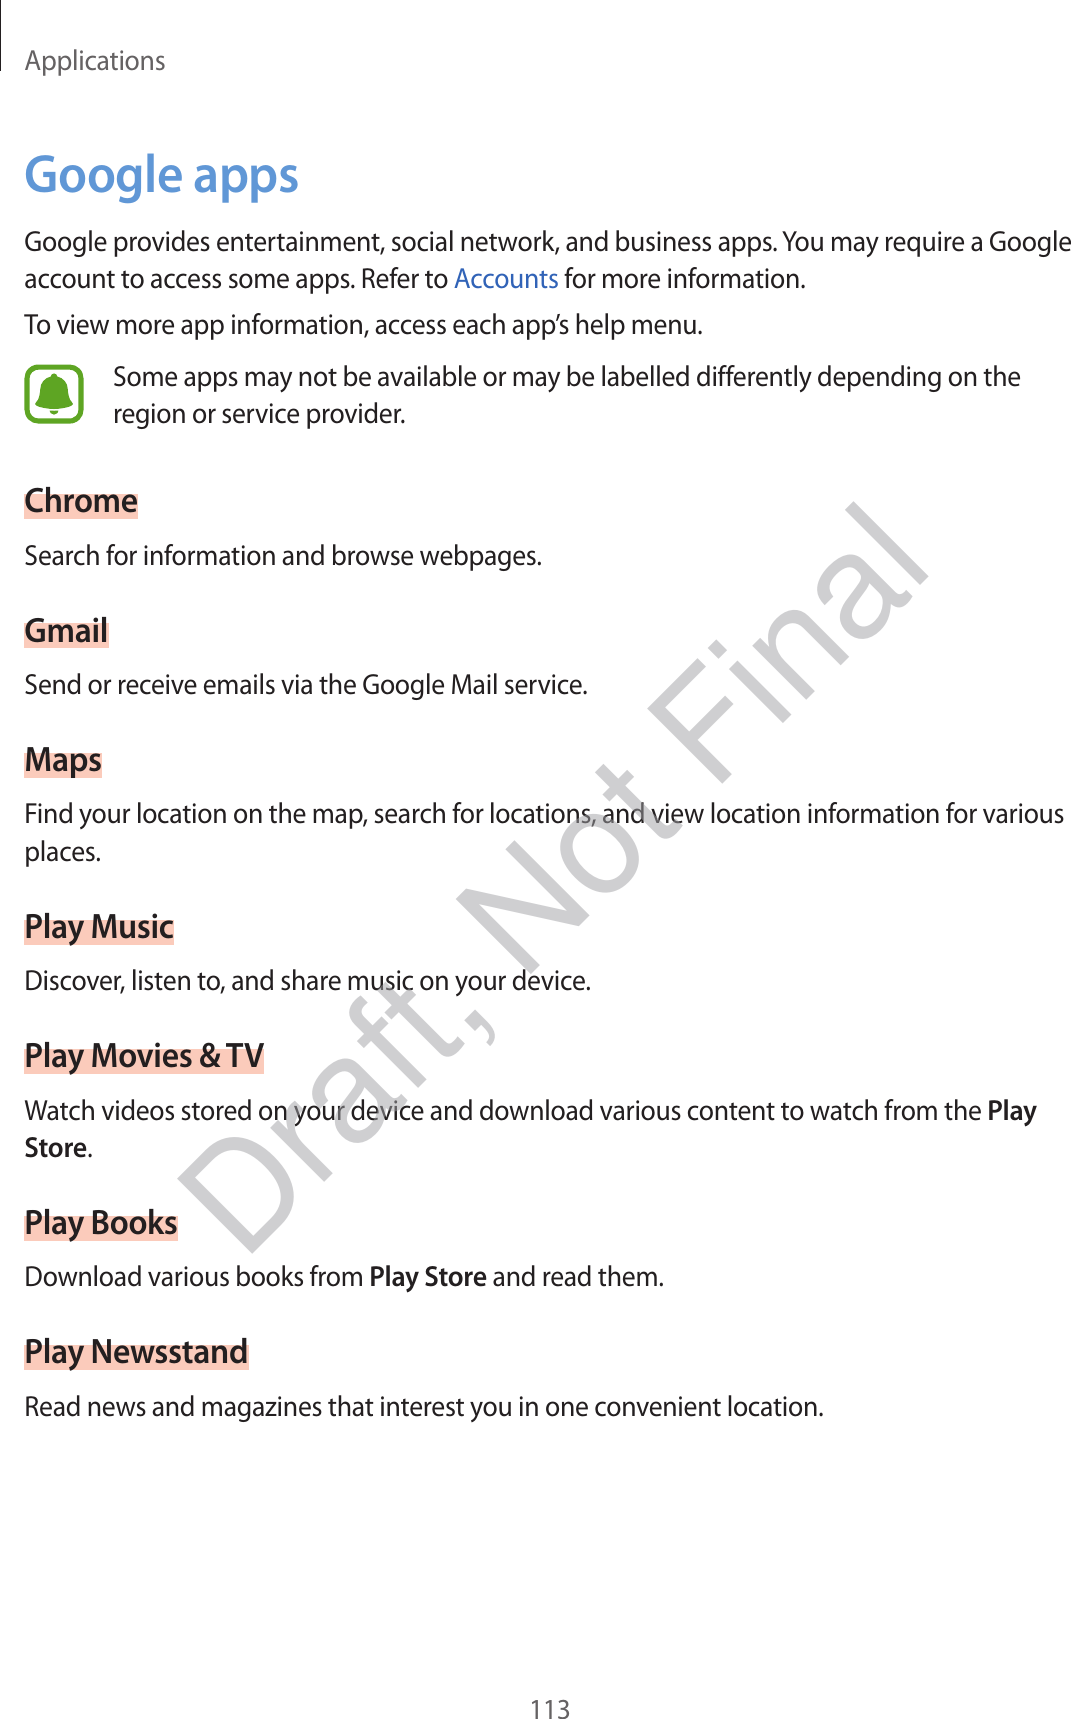 Applications113Google appsGoogle provides entertainment, social network, and business apps. You may require a Google account to access some apps. Refer to Accounts for more information.To view more app information, access each app’s help menu.Some apps may not be available or may be labelled differently depending on the region or service provider.ChromeSearch for information and browse webpages.GmailSend or receive emails via the Google Mail service.MapsFind your location on the map, search for locations, and view location information for various places.Play MusicDiscover, listen to, and share music on your device.Play Movies &amp; TVWatch videos stored on your device and download various content to watch from the Play Store.Play BooksDownload various books from Play Store and read them.Play NewsstandRead news and magazines that interest you in one convenient location.Draft, Not Final